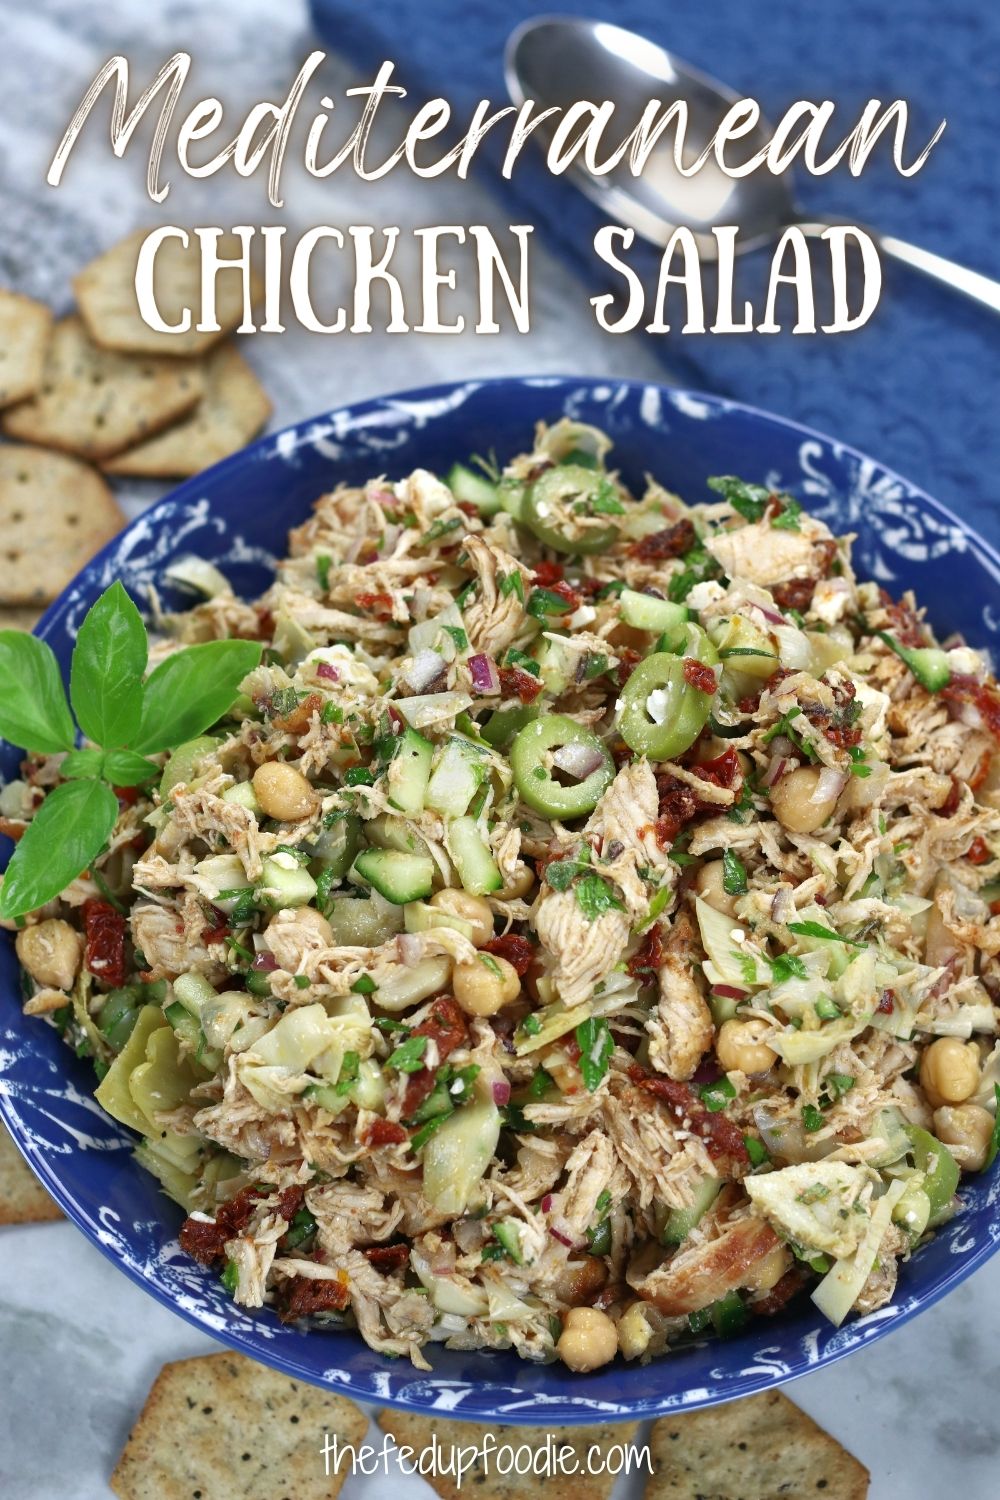 Mediterranean Chicken Salad Sandwich is a healthy and satisfying lighter lunch or dinner. Made with tender shredded chicken, chickpeas, refreshing cucumbers and tangy feta. Add in the simple olive oil red wine vinaigrette and you have symphony of Mediterranean flavors. #HealthyChickenSaladSandwich #NoMayoChickenSaladSandwich #ChickenSaladSandwichWithoutMayo #MediterraneanDietChickenSaladSandwich #MediterraneanChickenSaladHealthy